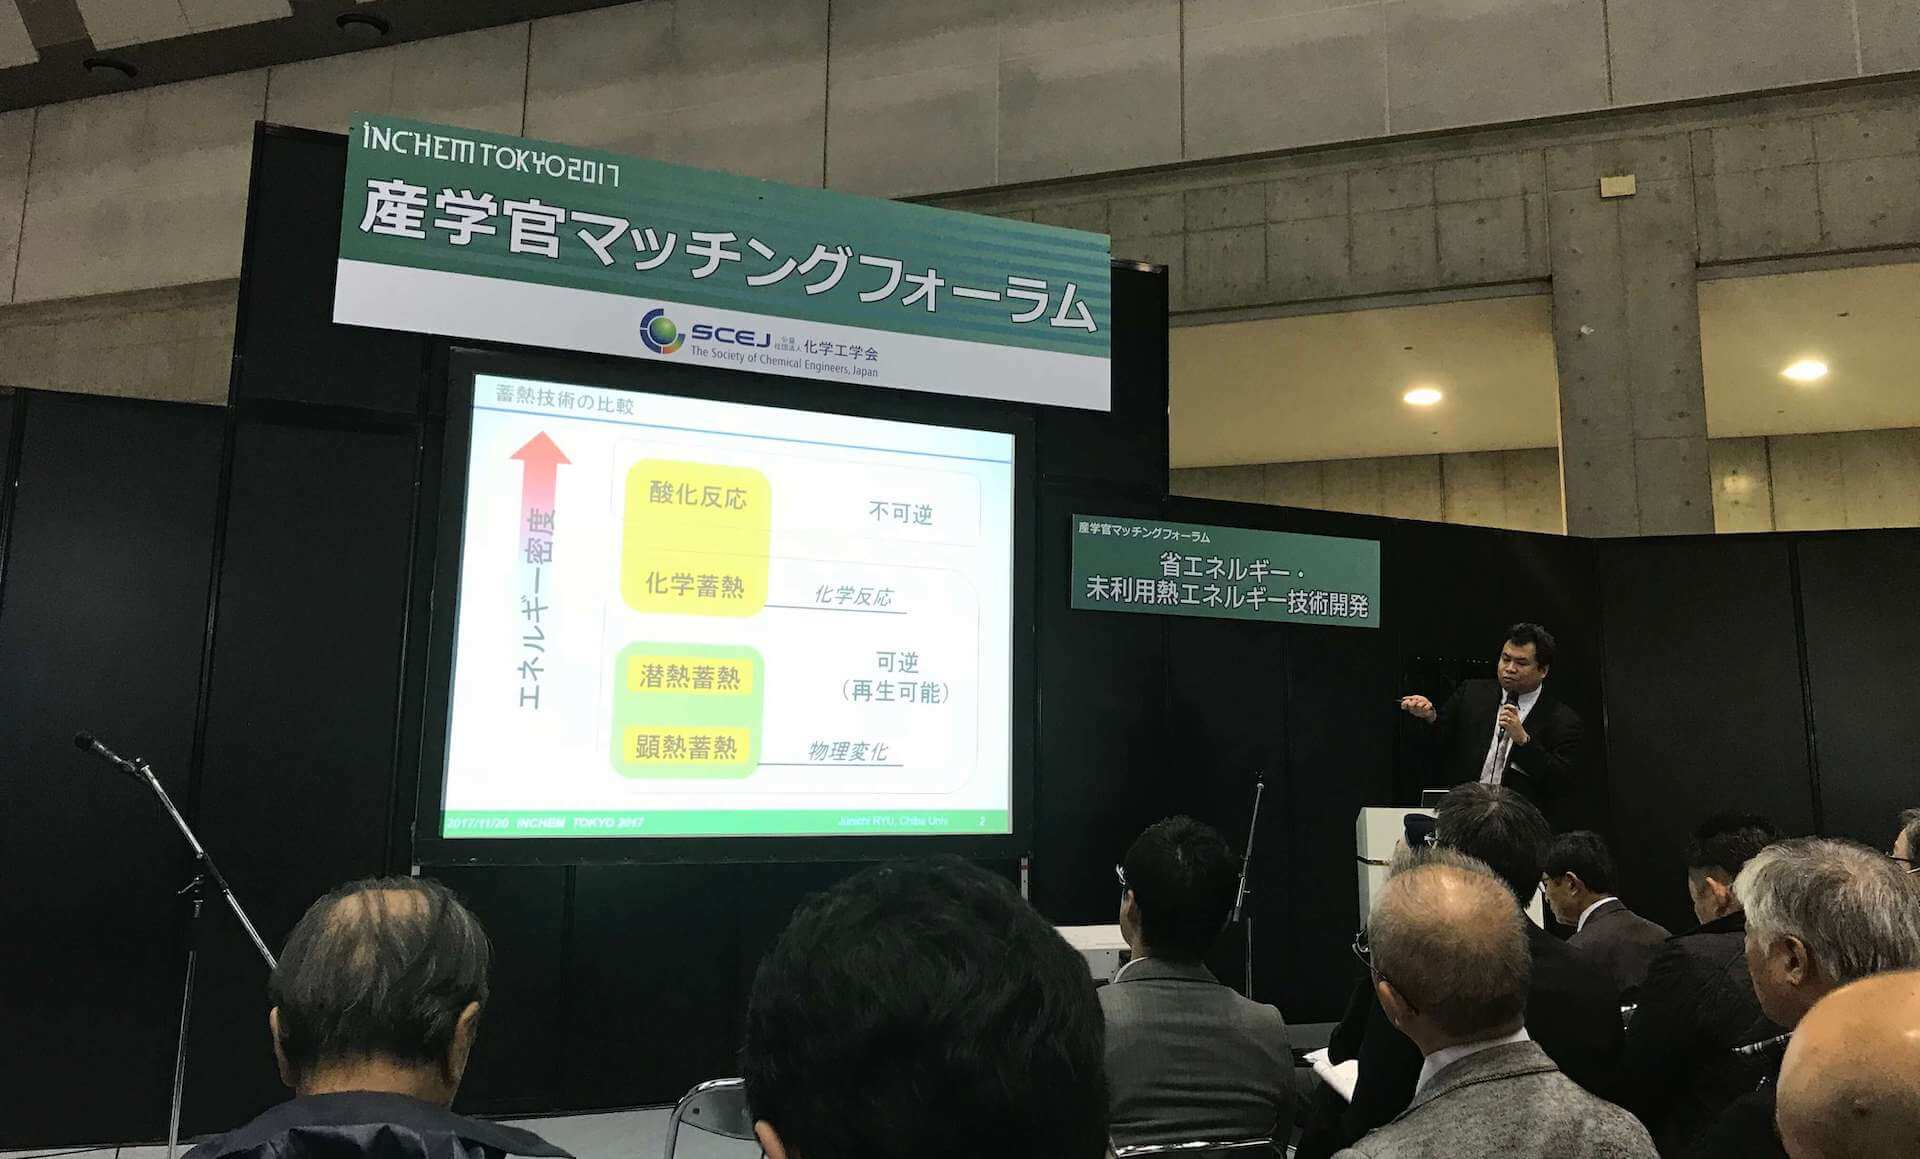 Mr. Ryu held a lecture on Chemical Thermal Storage – a technology to store a large amount of heat by using chemical reactions.